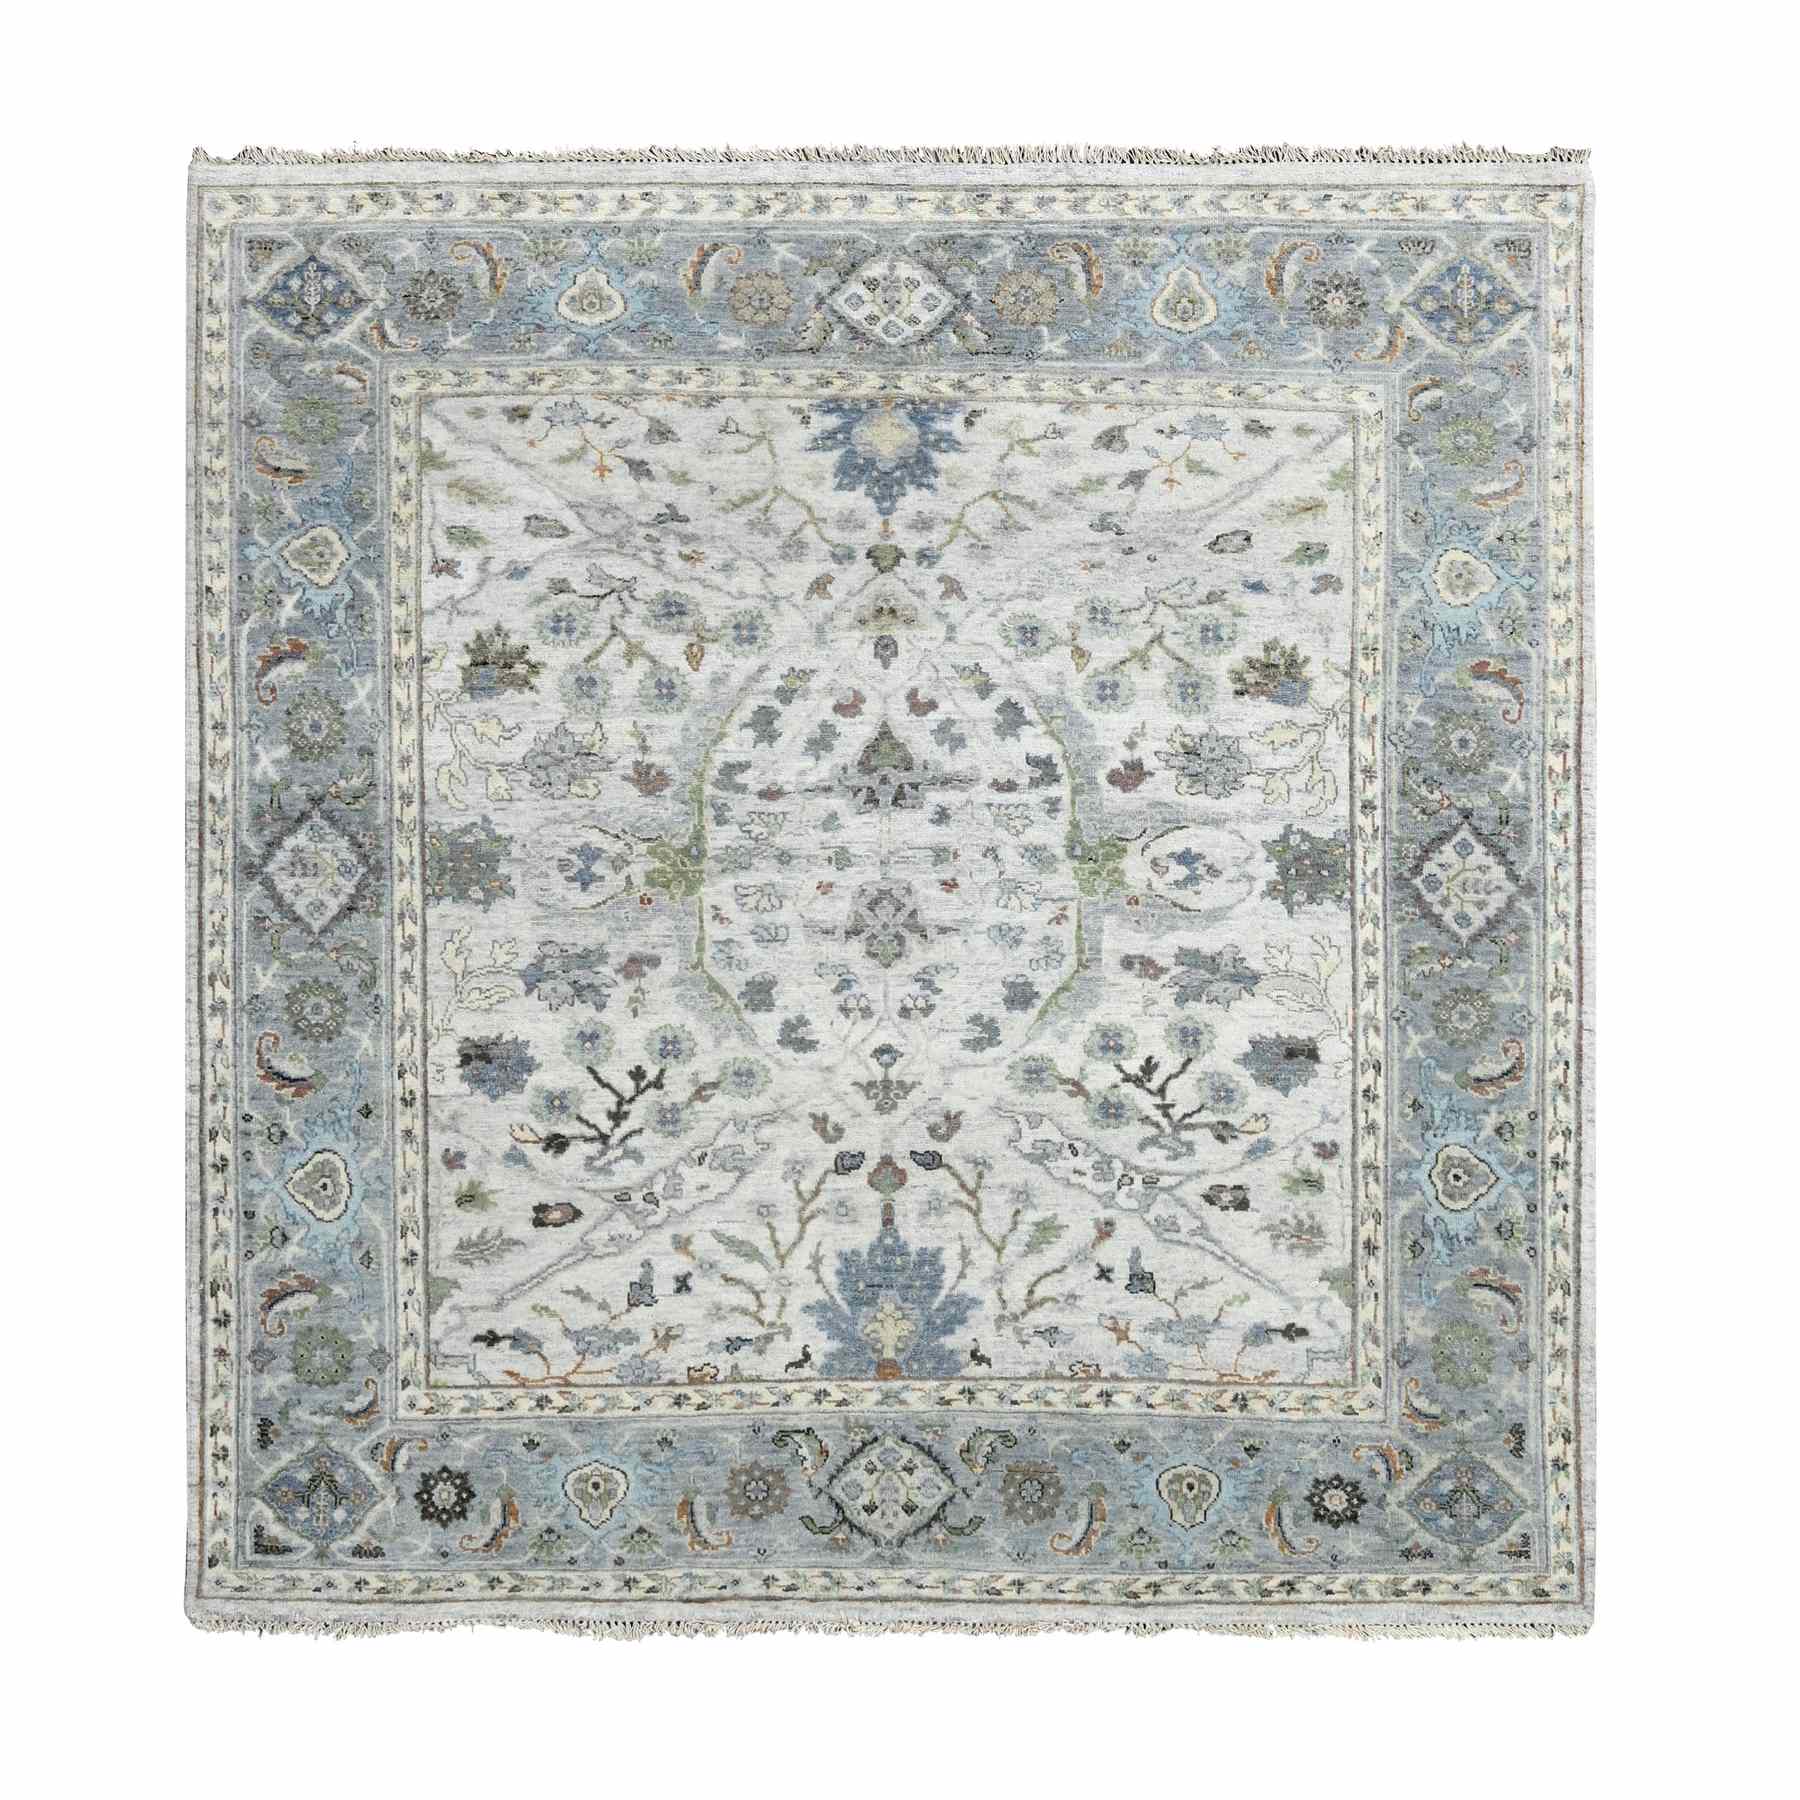 Evening Shadow Gray, Hand Knotted Soft and Vibrant Wool Oushak With Floral Design Natural Dyes, Densely Woven, Square Oriental 